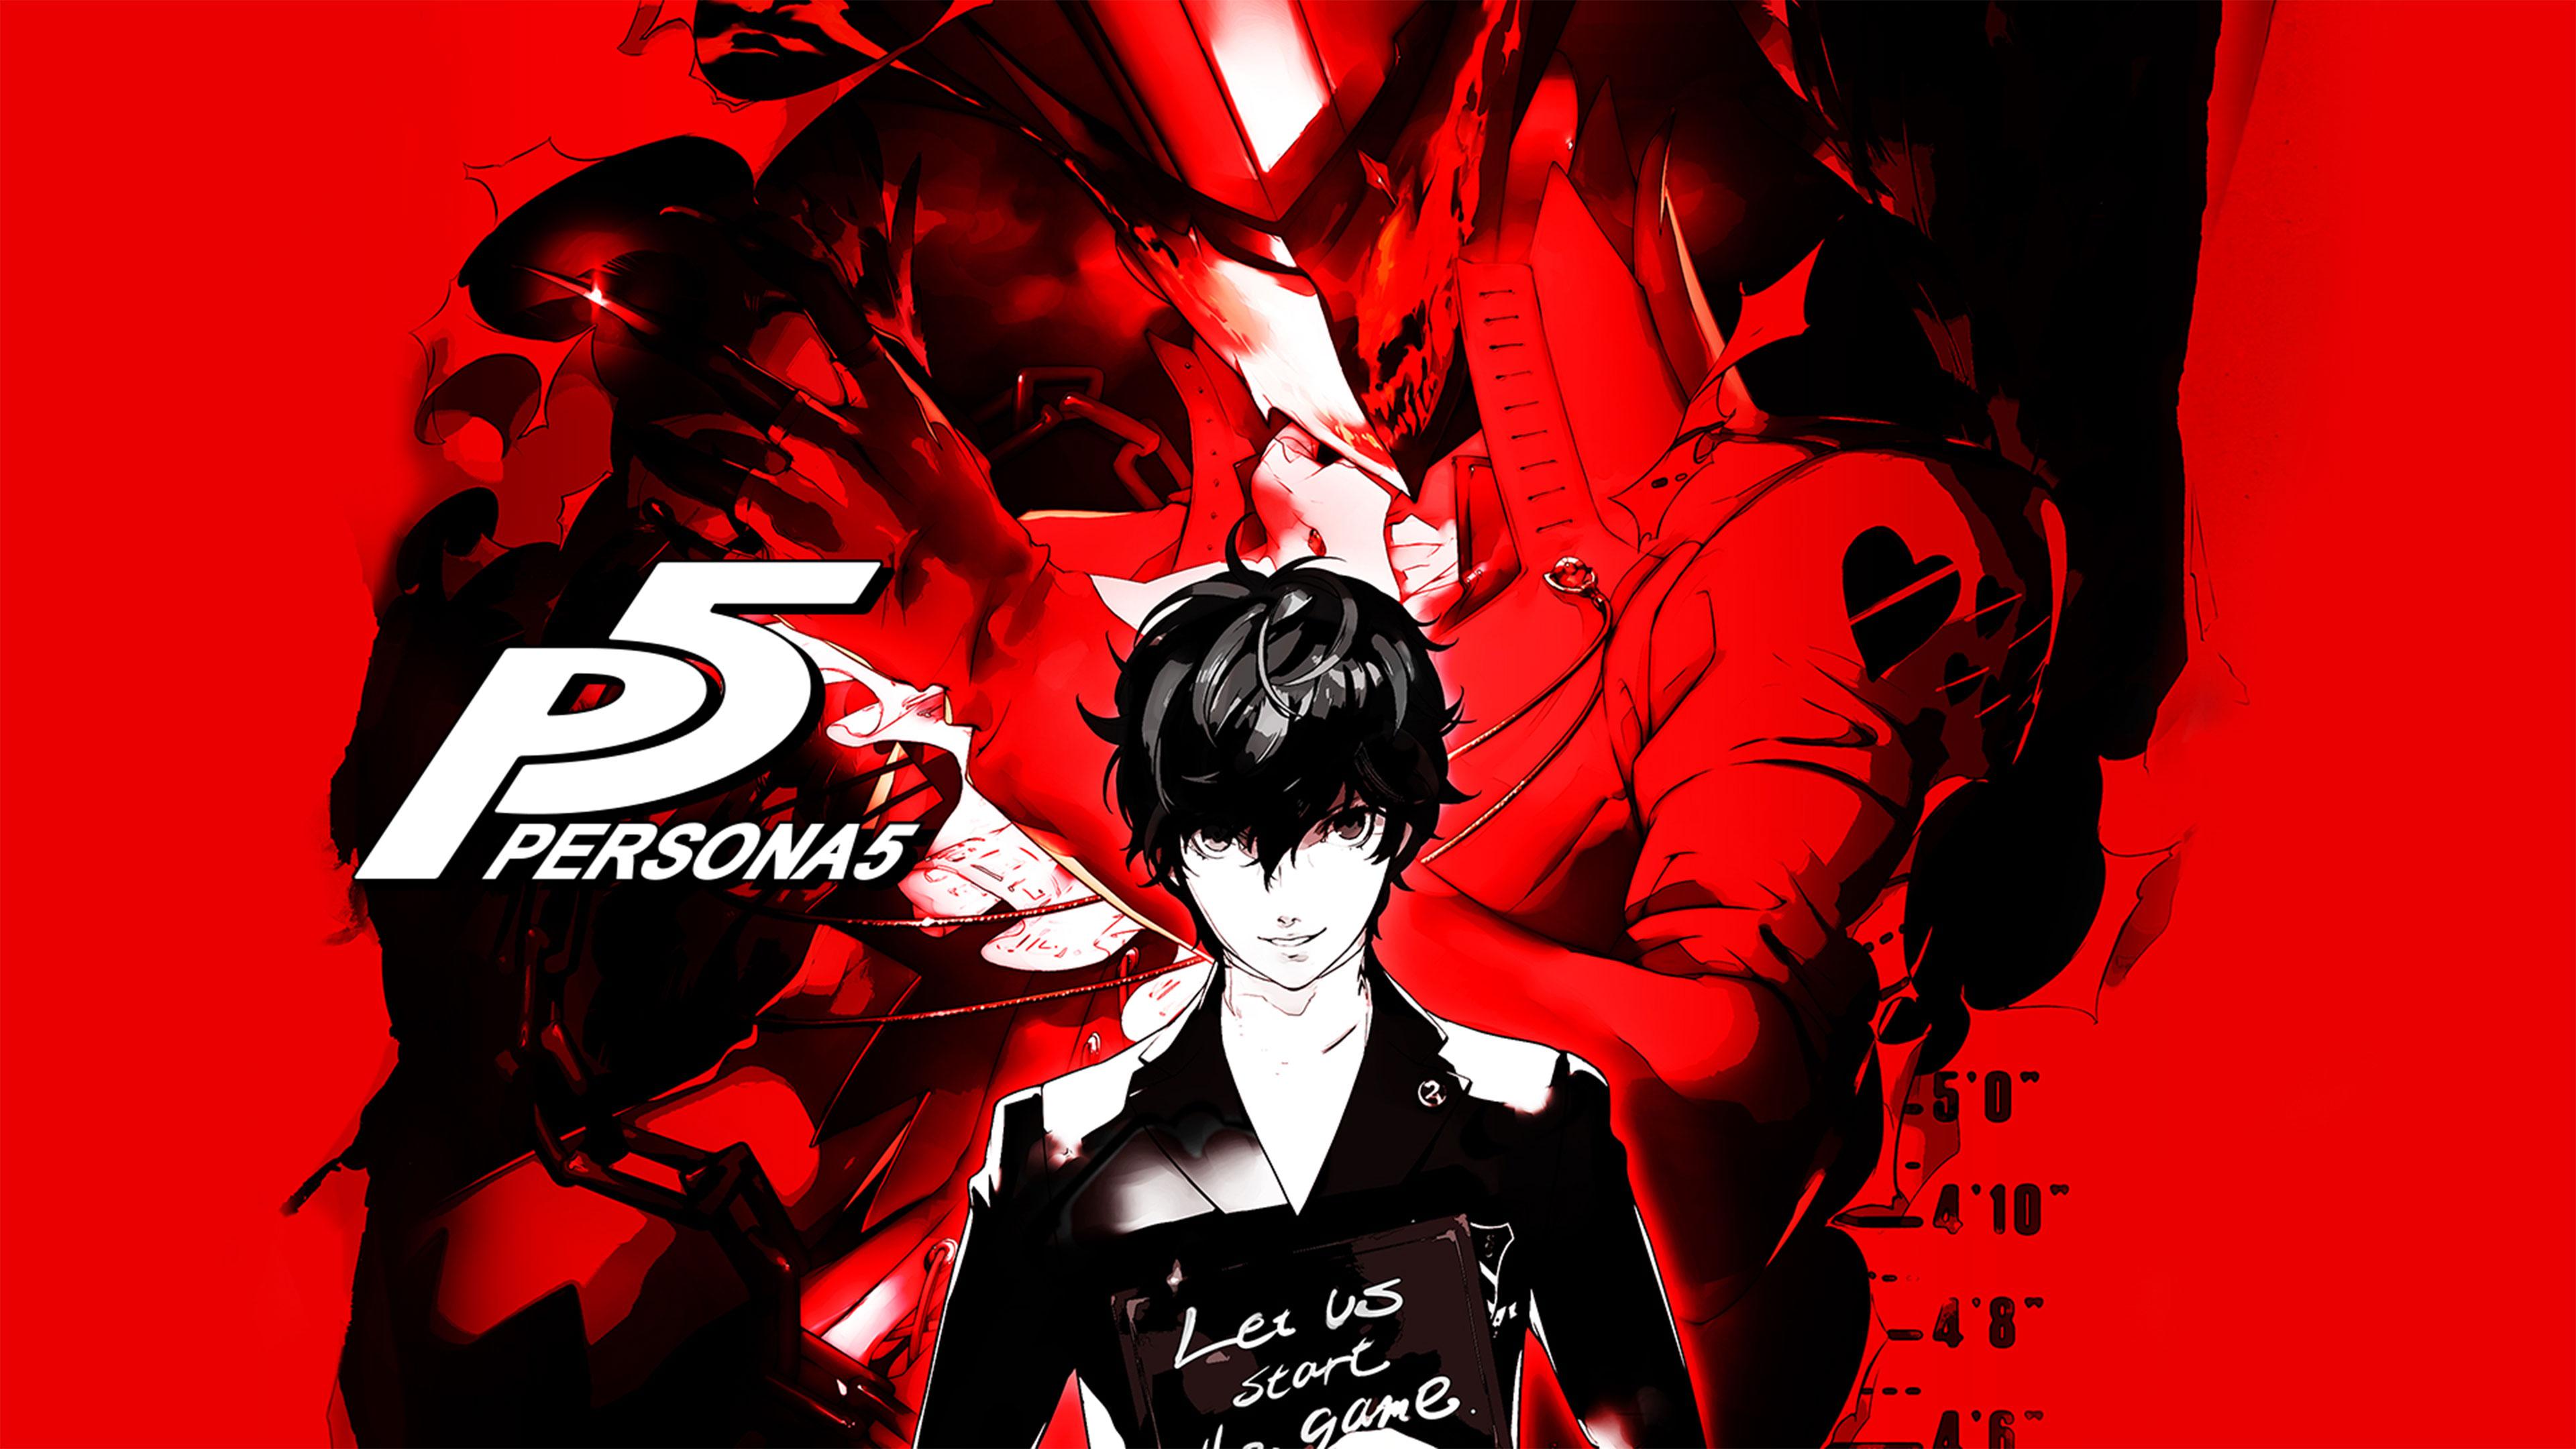 Anime Ps3 Theme Wallpapers - Wallpaper Cave